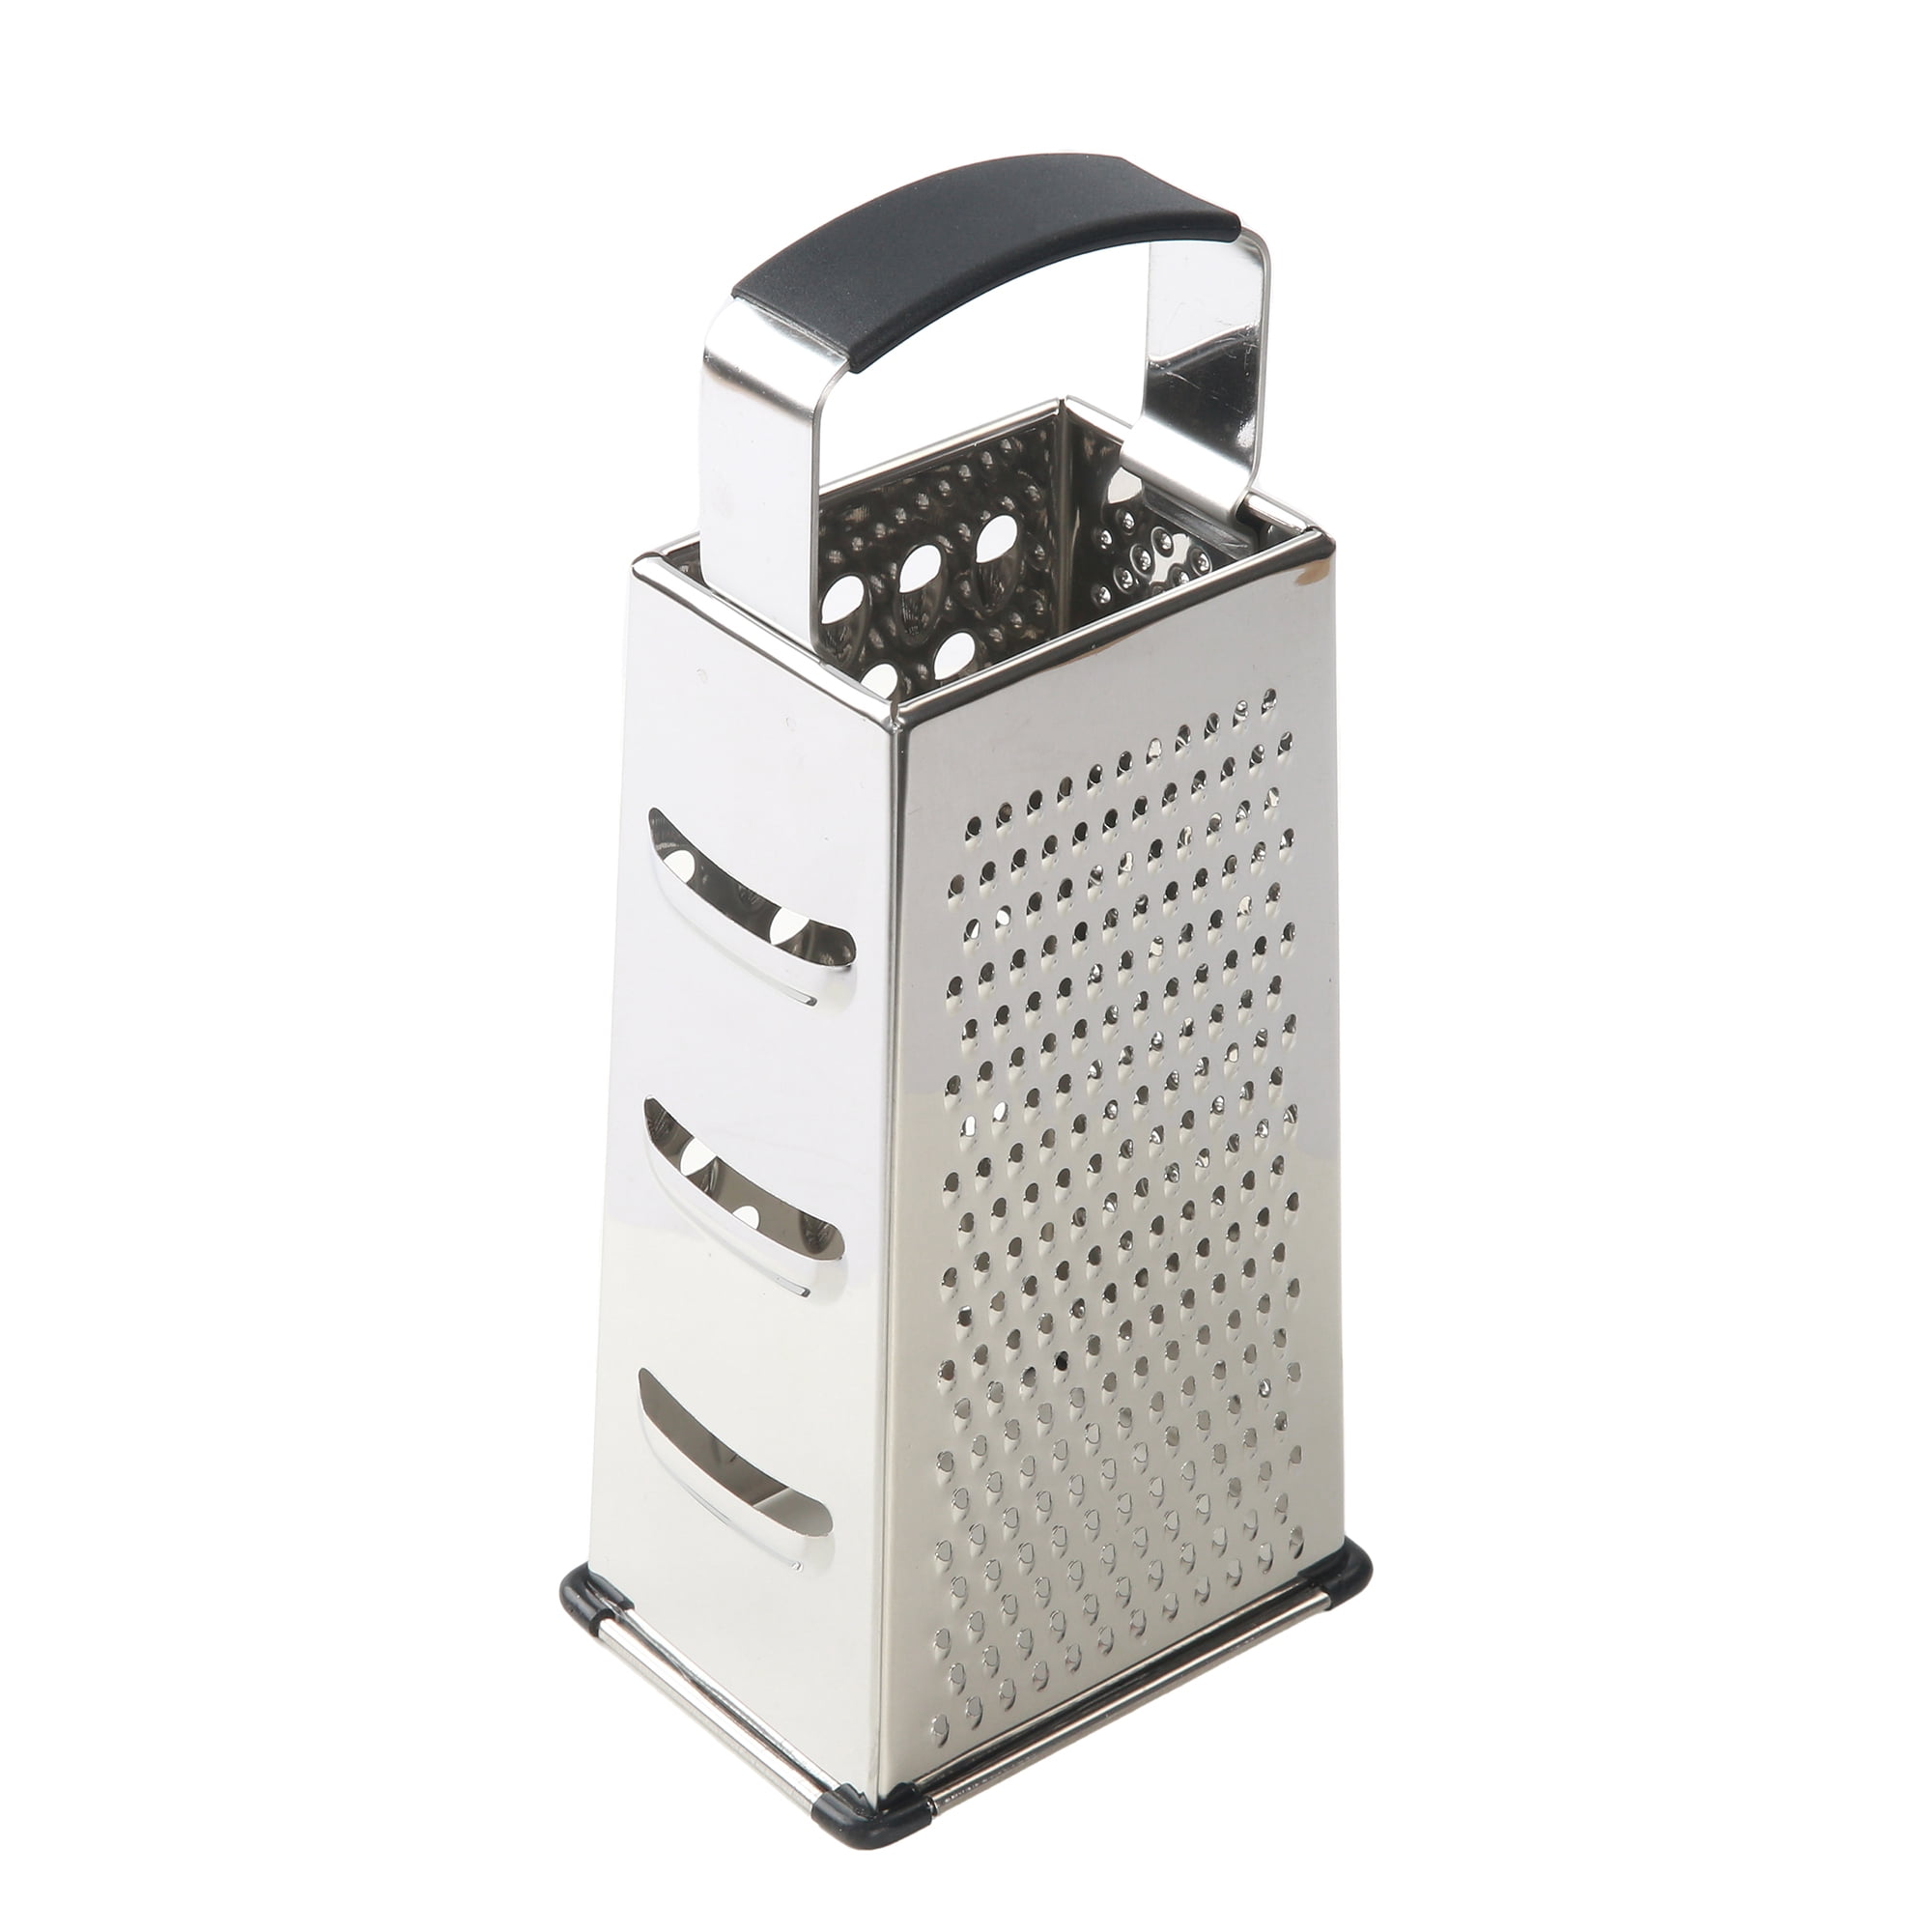 Grip Ez Handheld Grater - The Peppermill